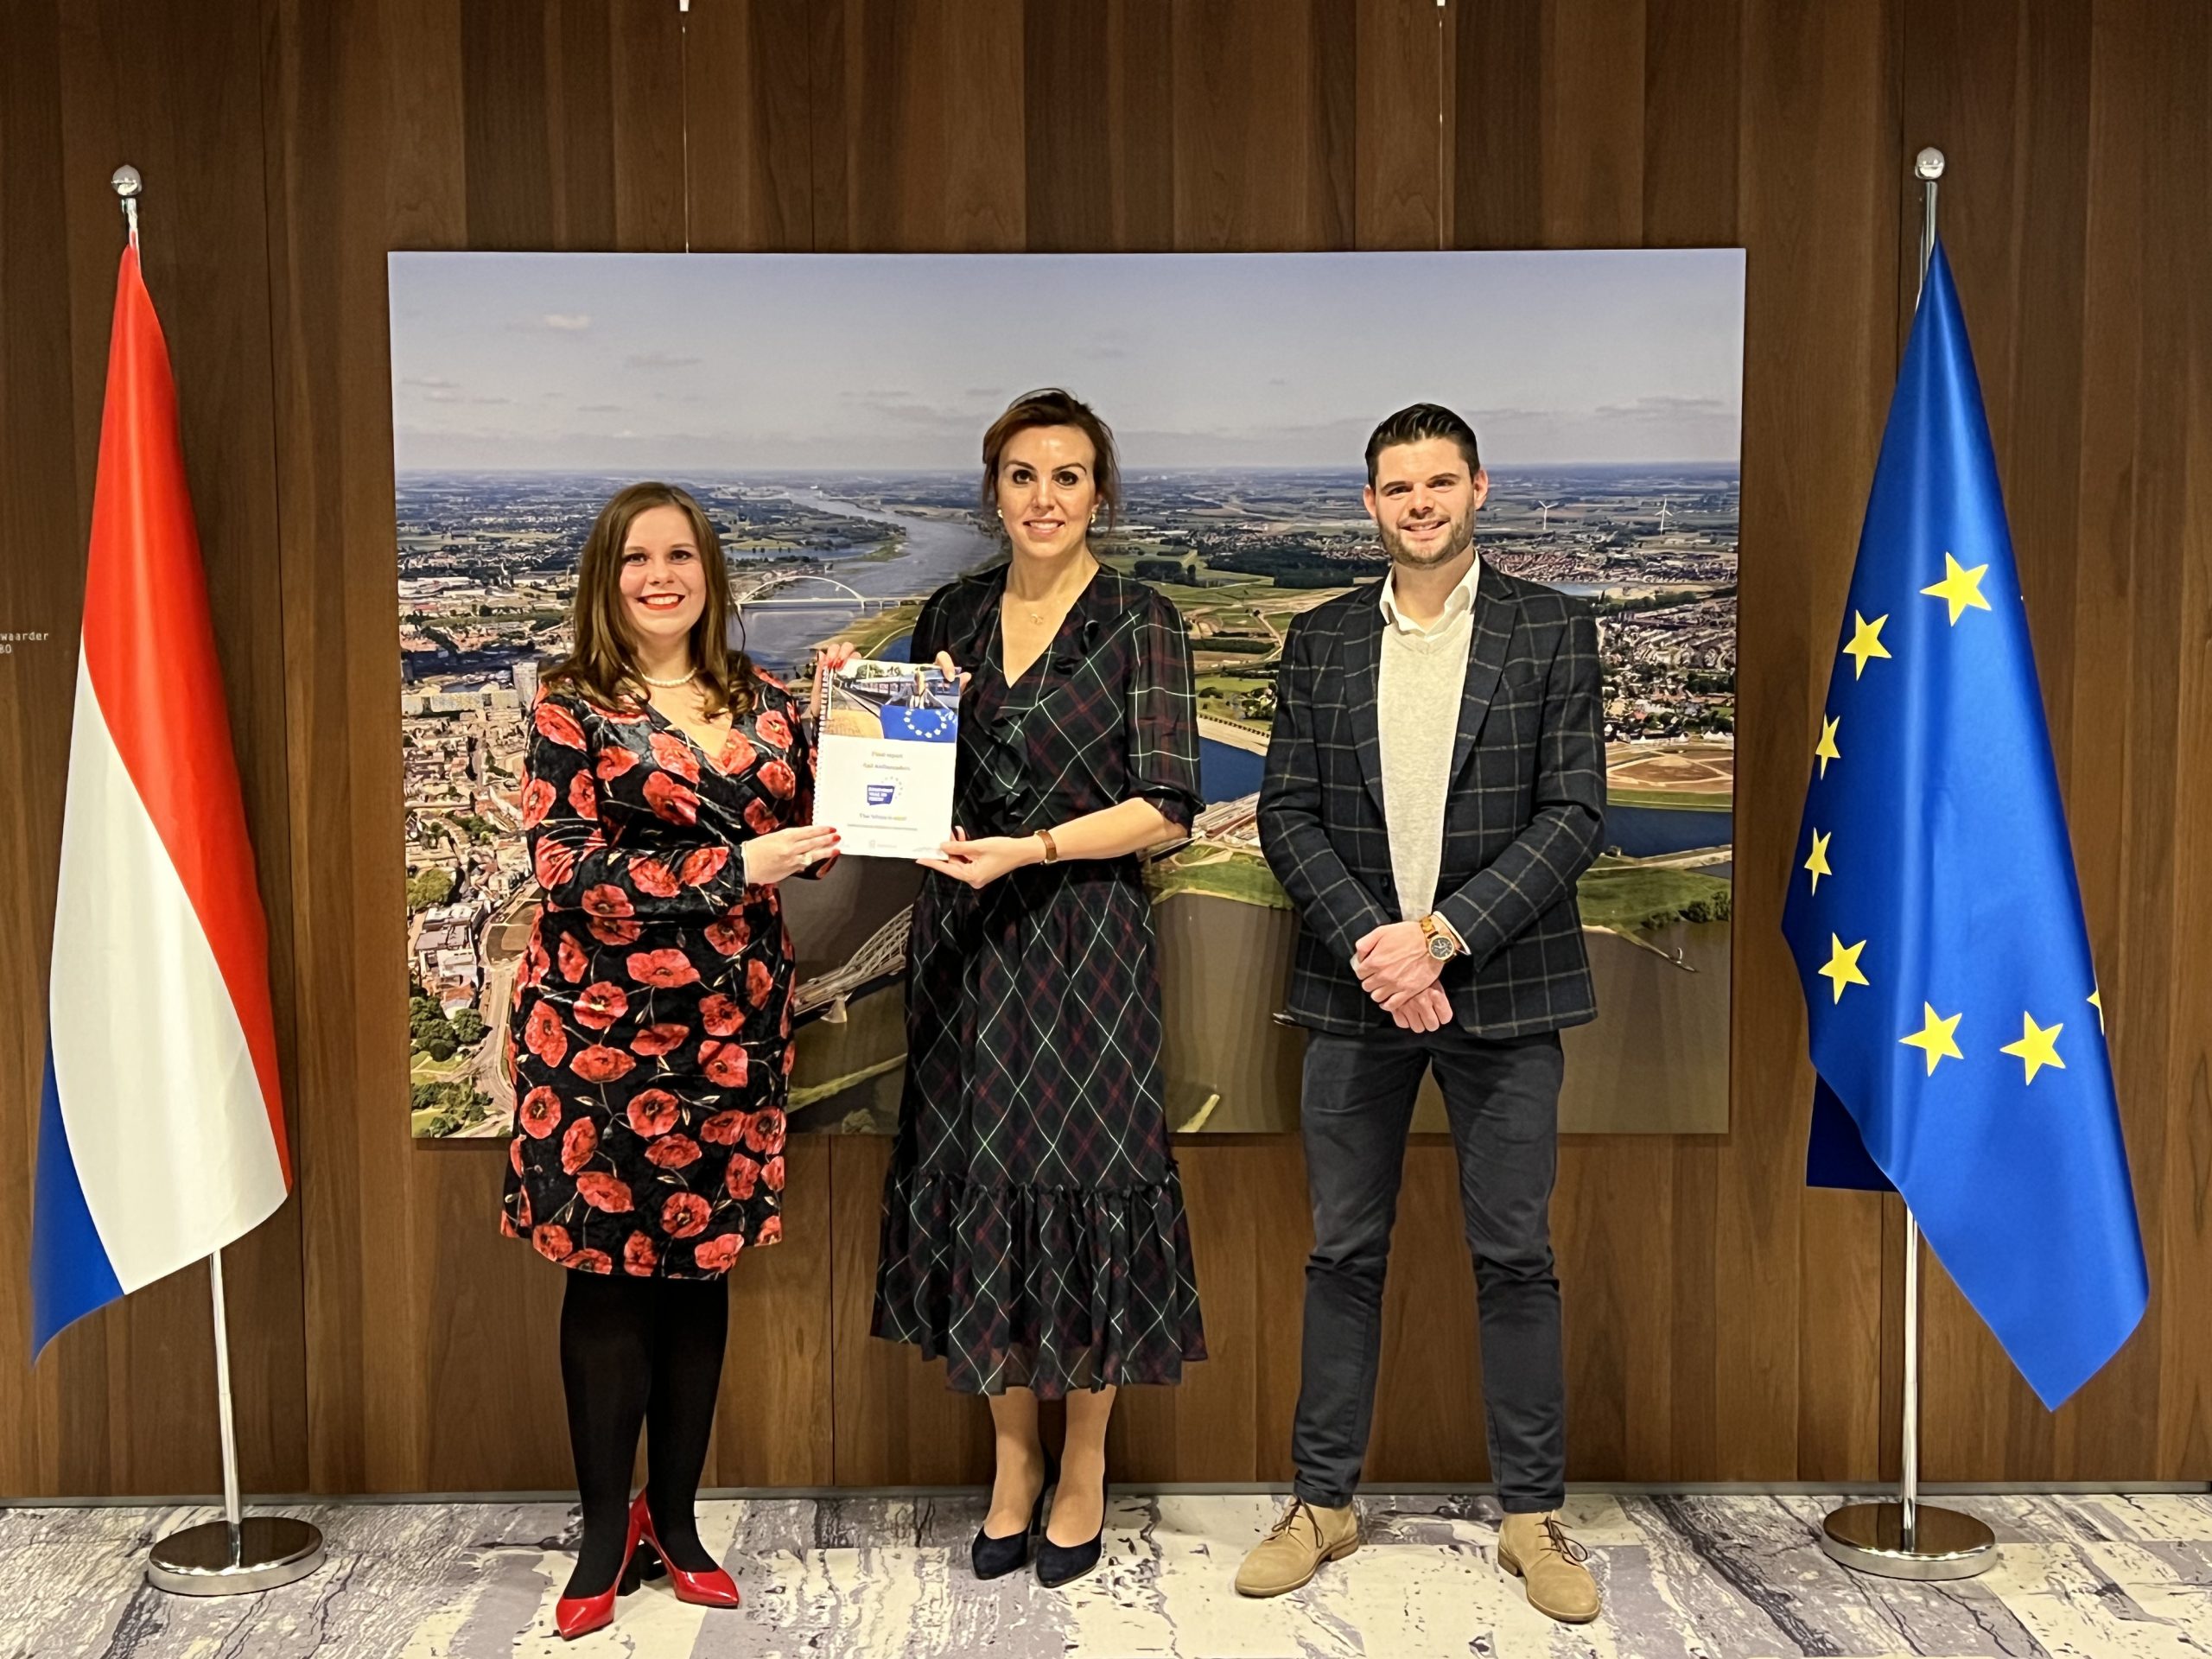 Rail Cargo Ambassadors present final report on European Year of Youth